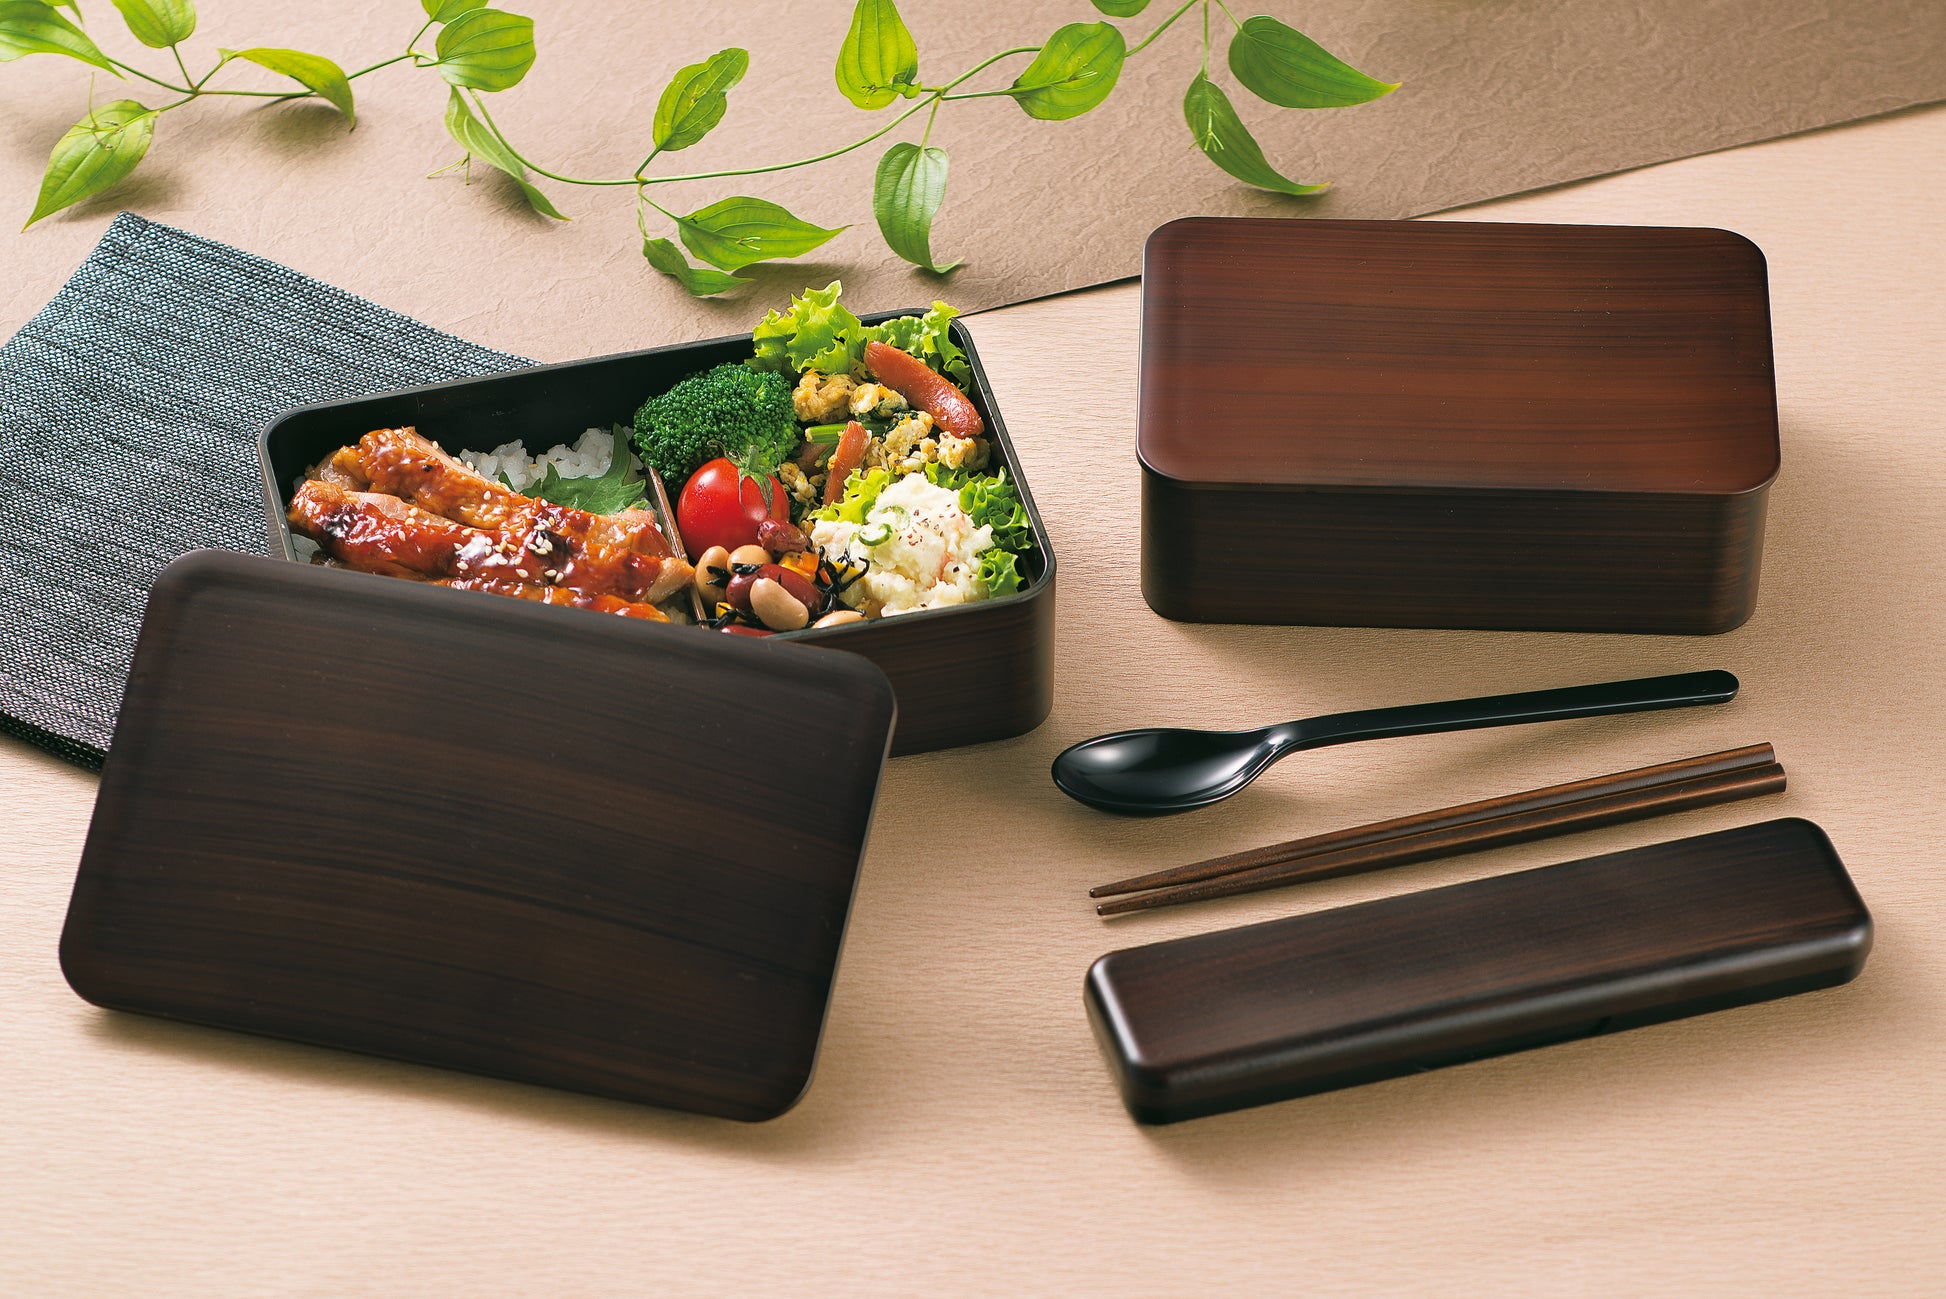 Japanese Bento Boxes and accessories wholesale from Kyoto